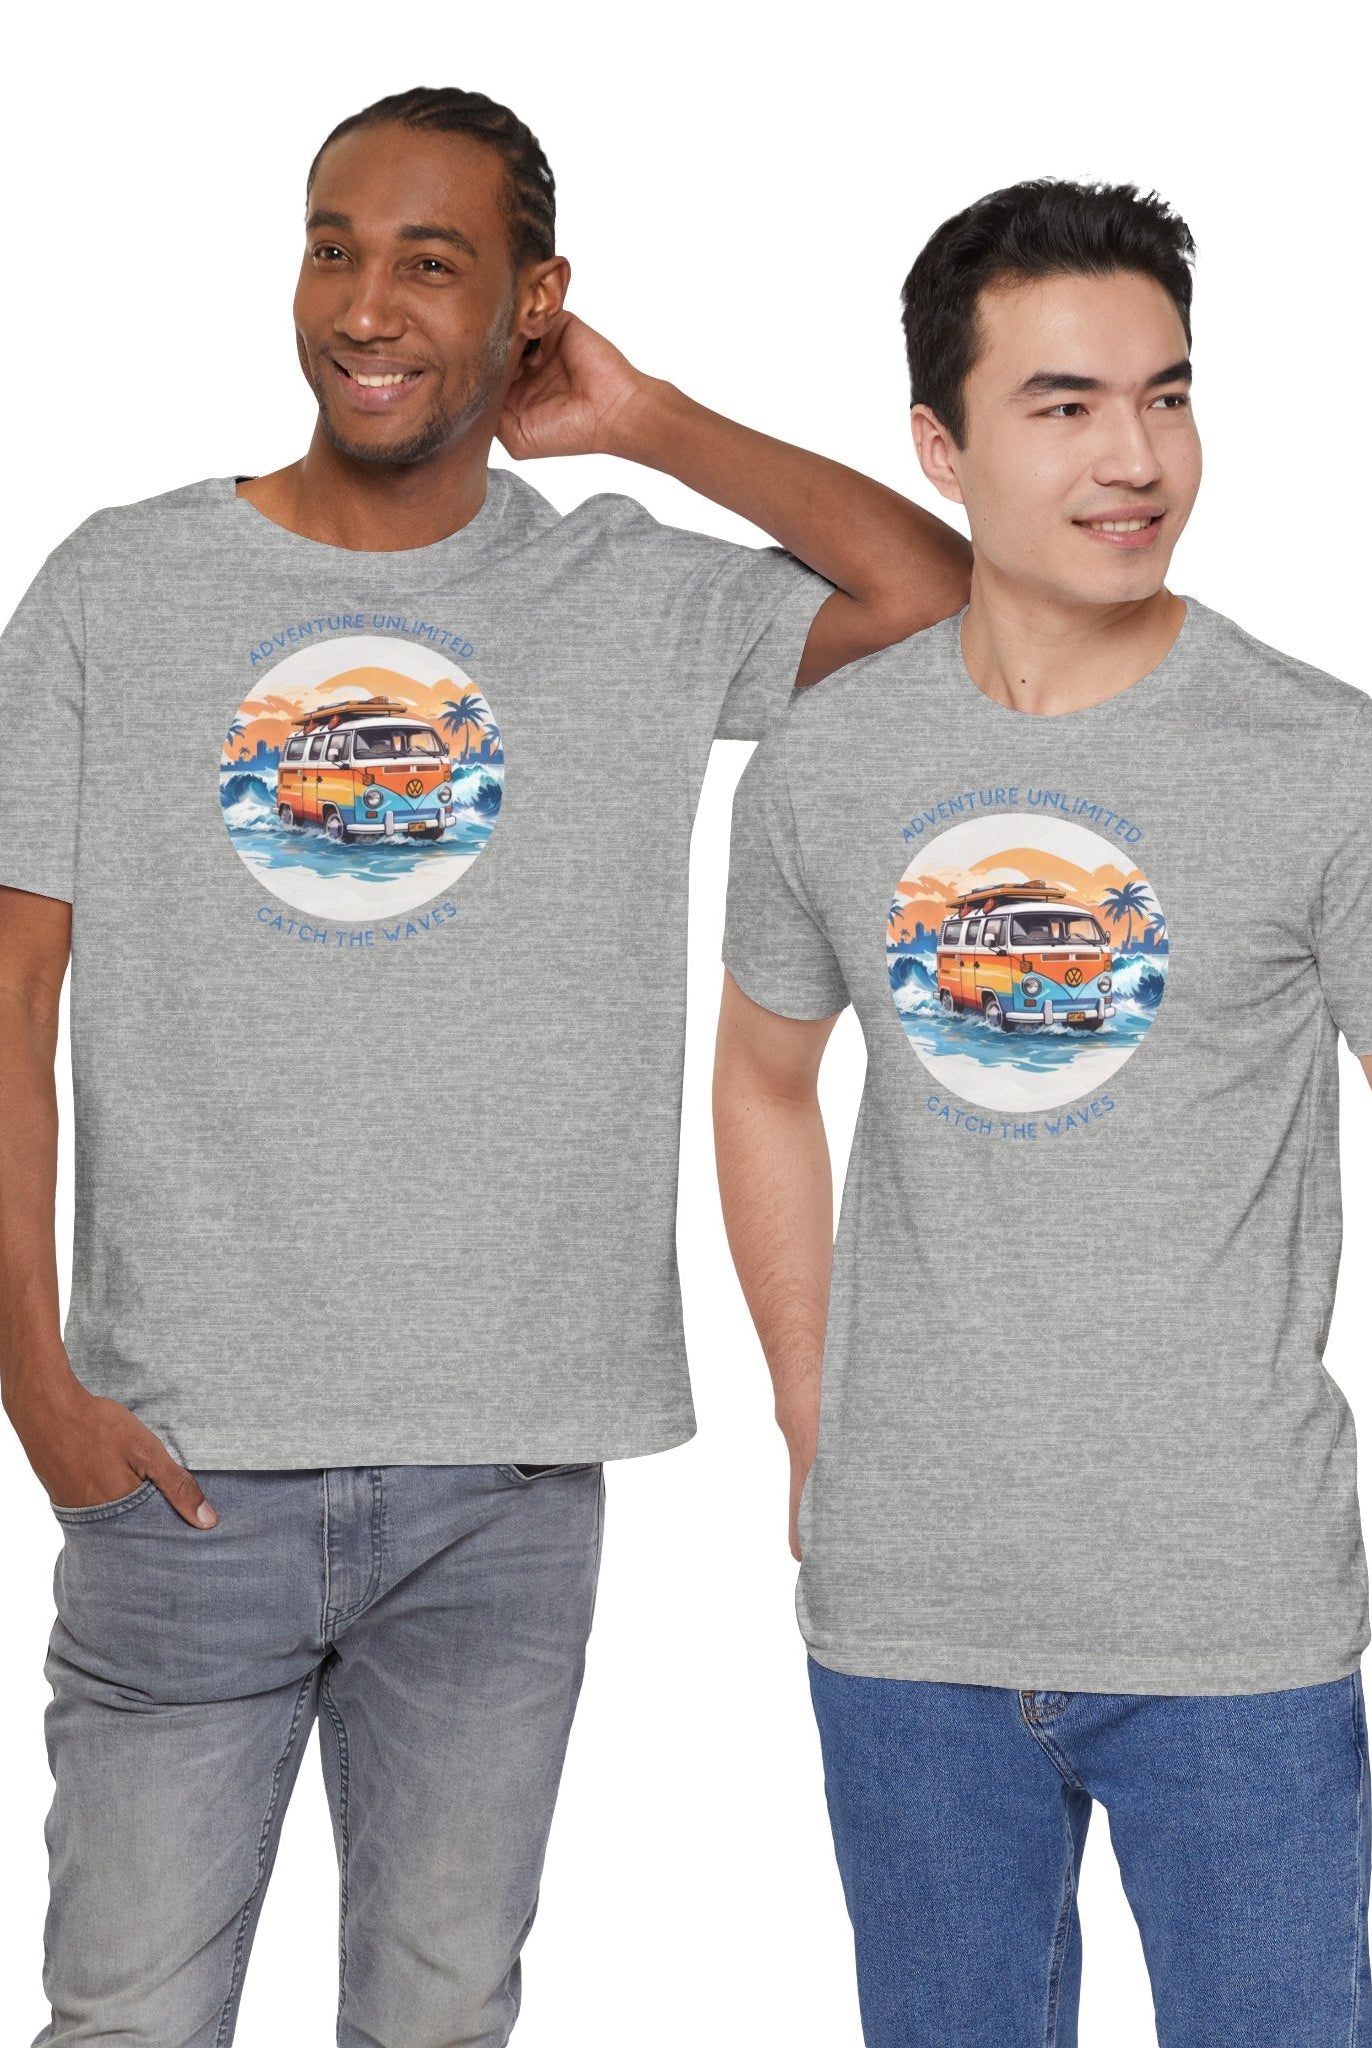 Adventure Unlimited men’s grey t-shirts with mountain sunset design, Bella & Canvas direct-to-garment printed item